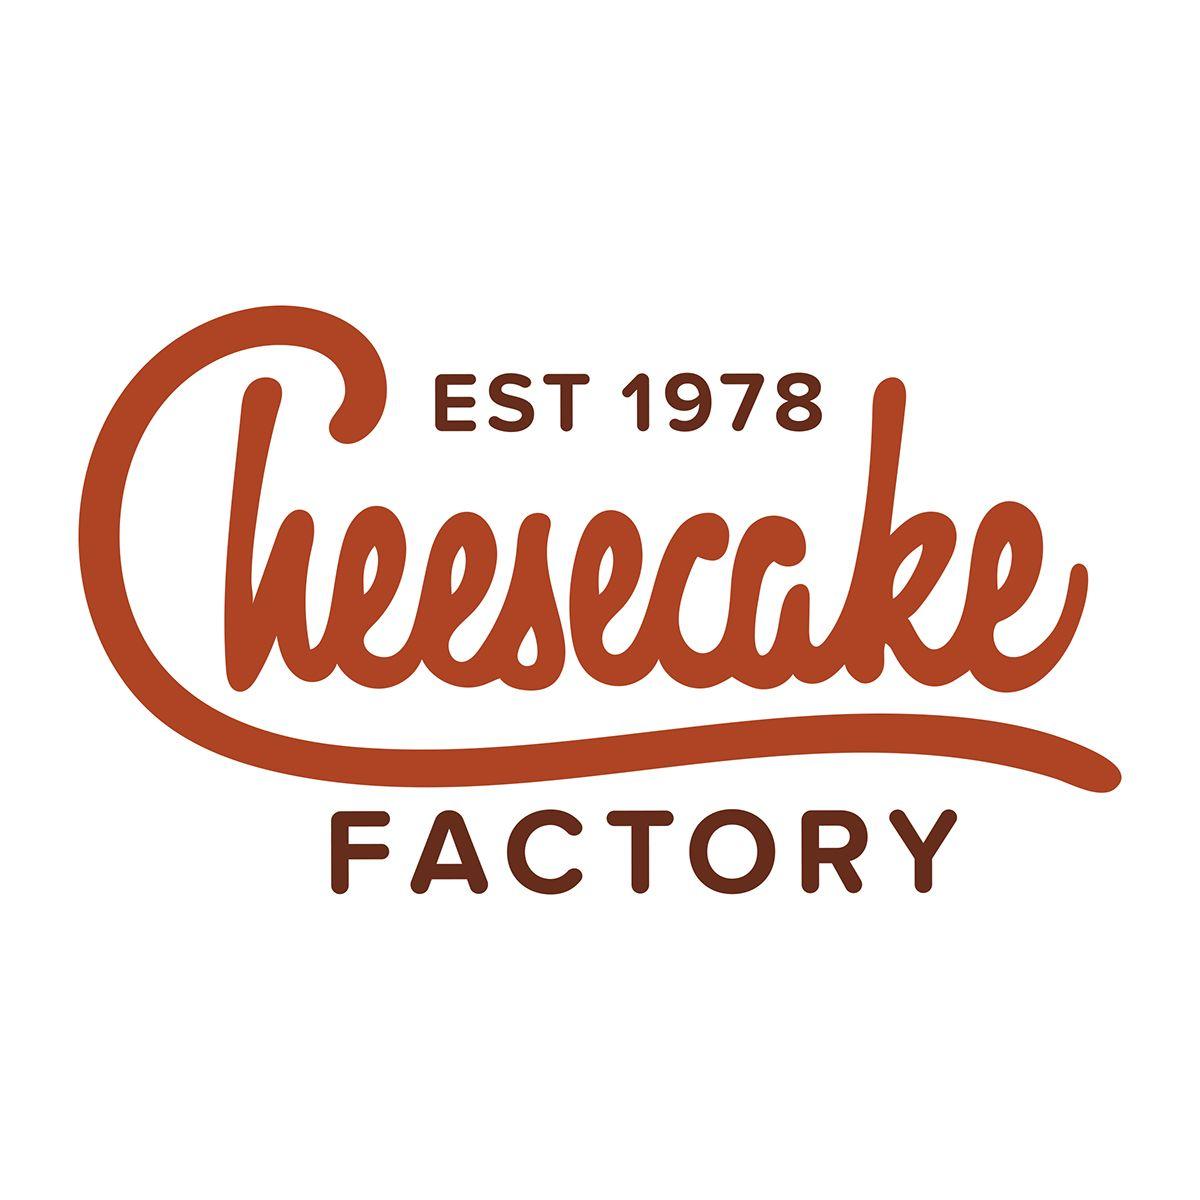 Cheesecake Logo - The Cheesecake Factory Redesign Project on Behance